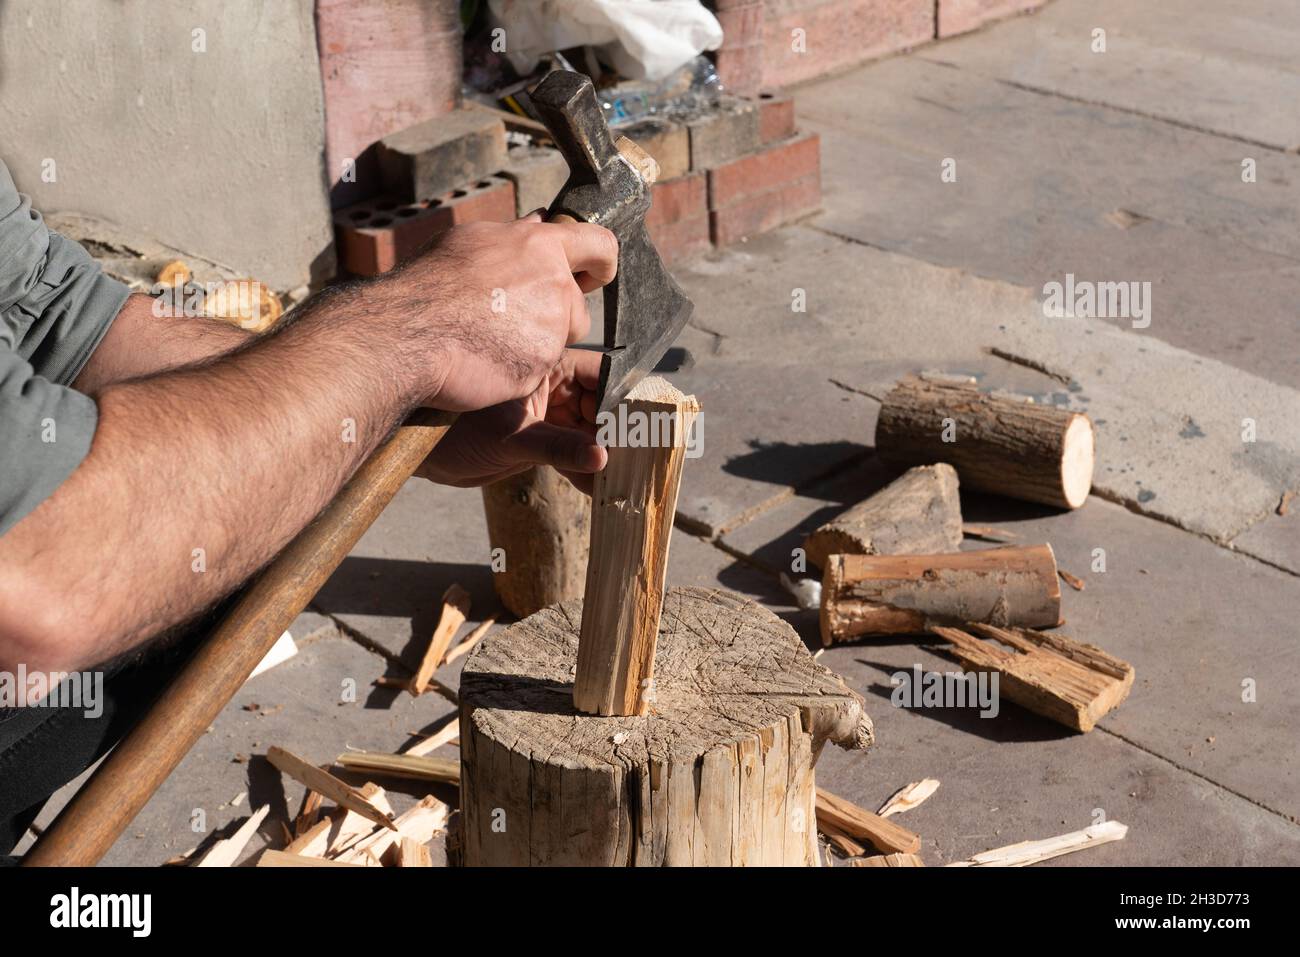 Man chopping wood with an ax. Stock Photo